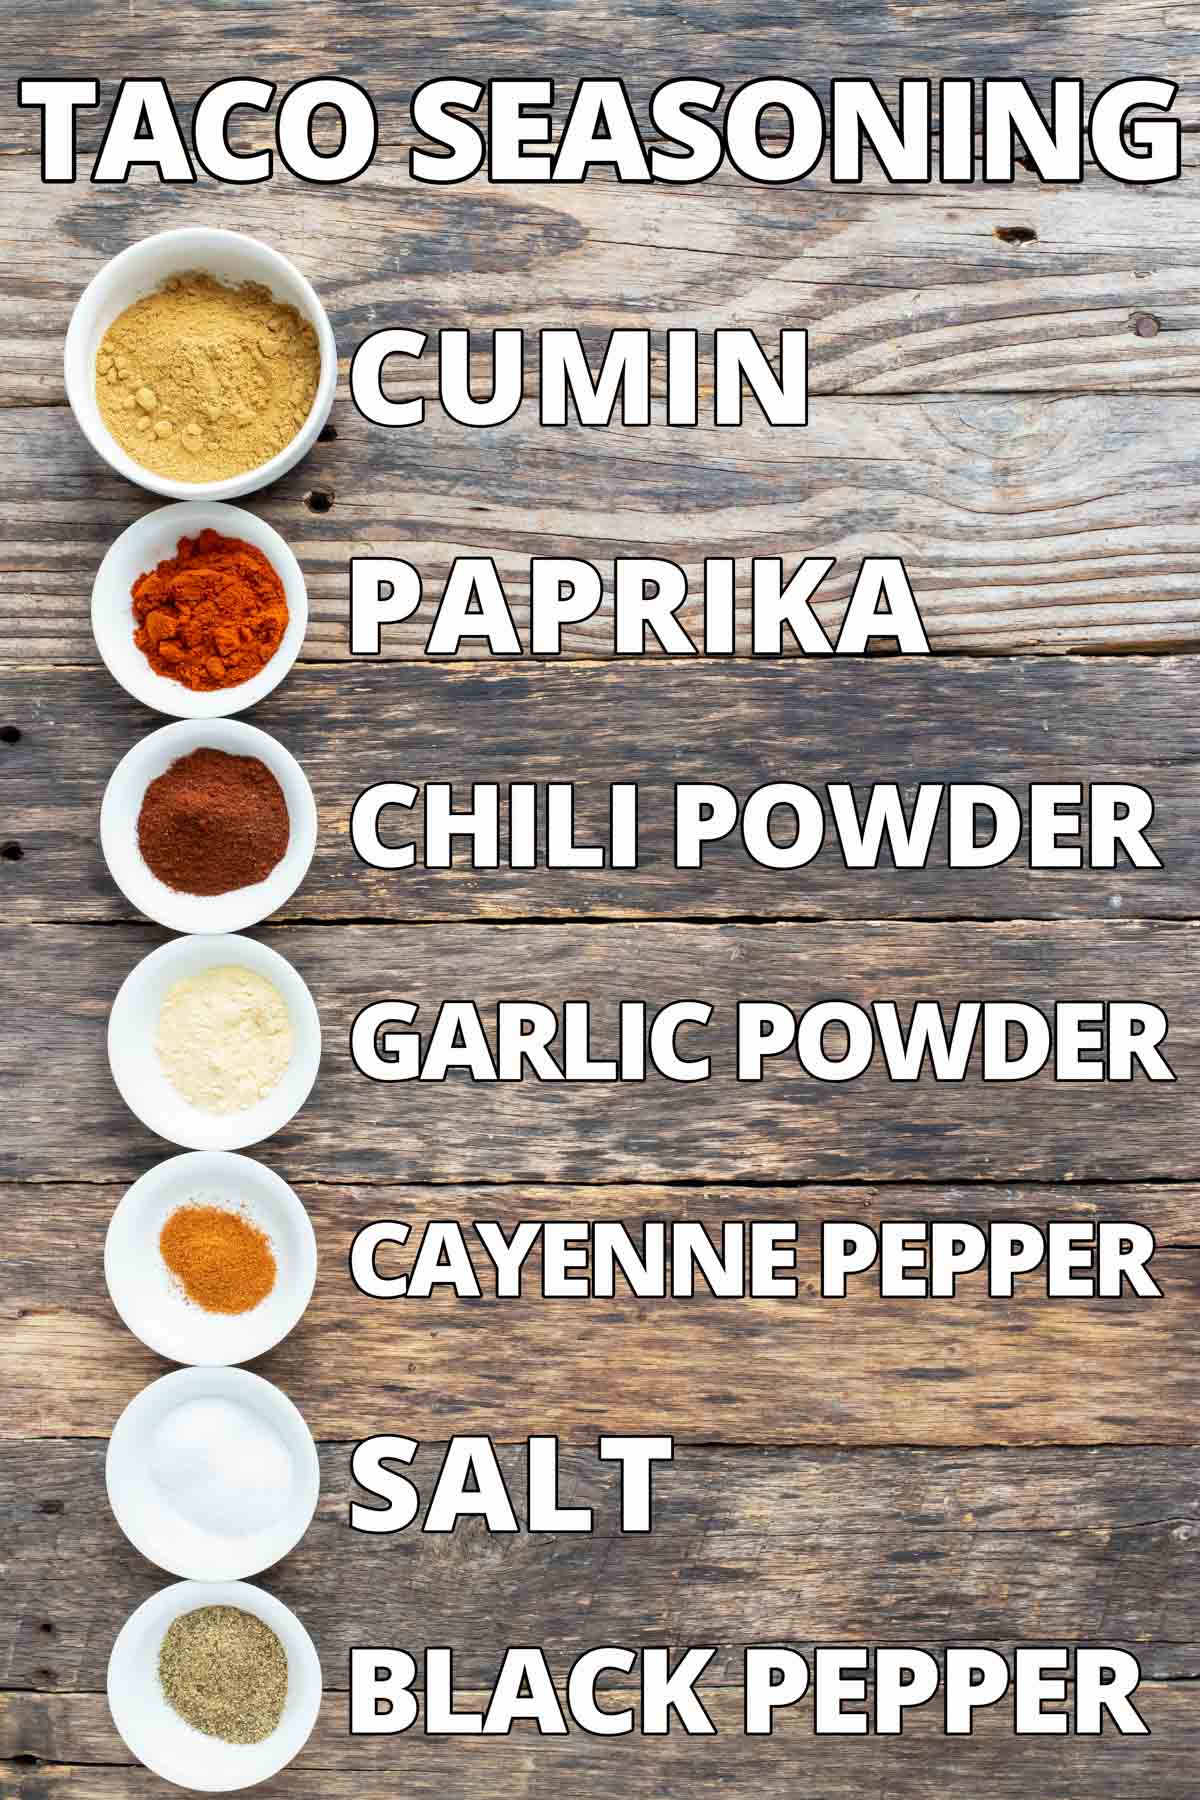 Taco seasoning ingredients on a wooden backdrop showing what is in taco seasoning mix.